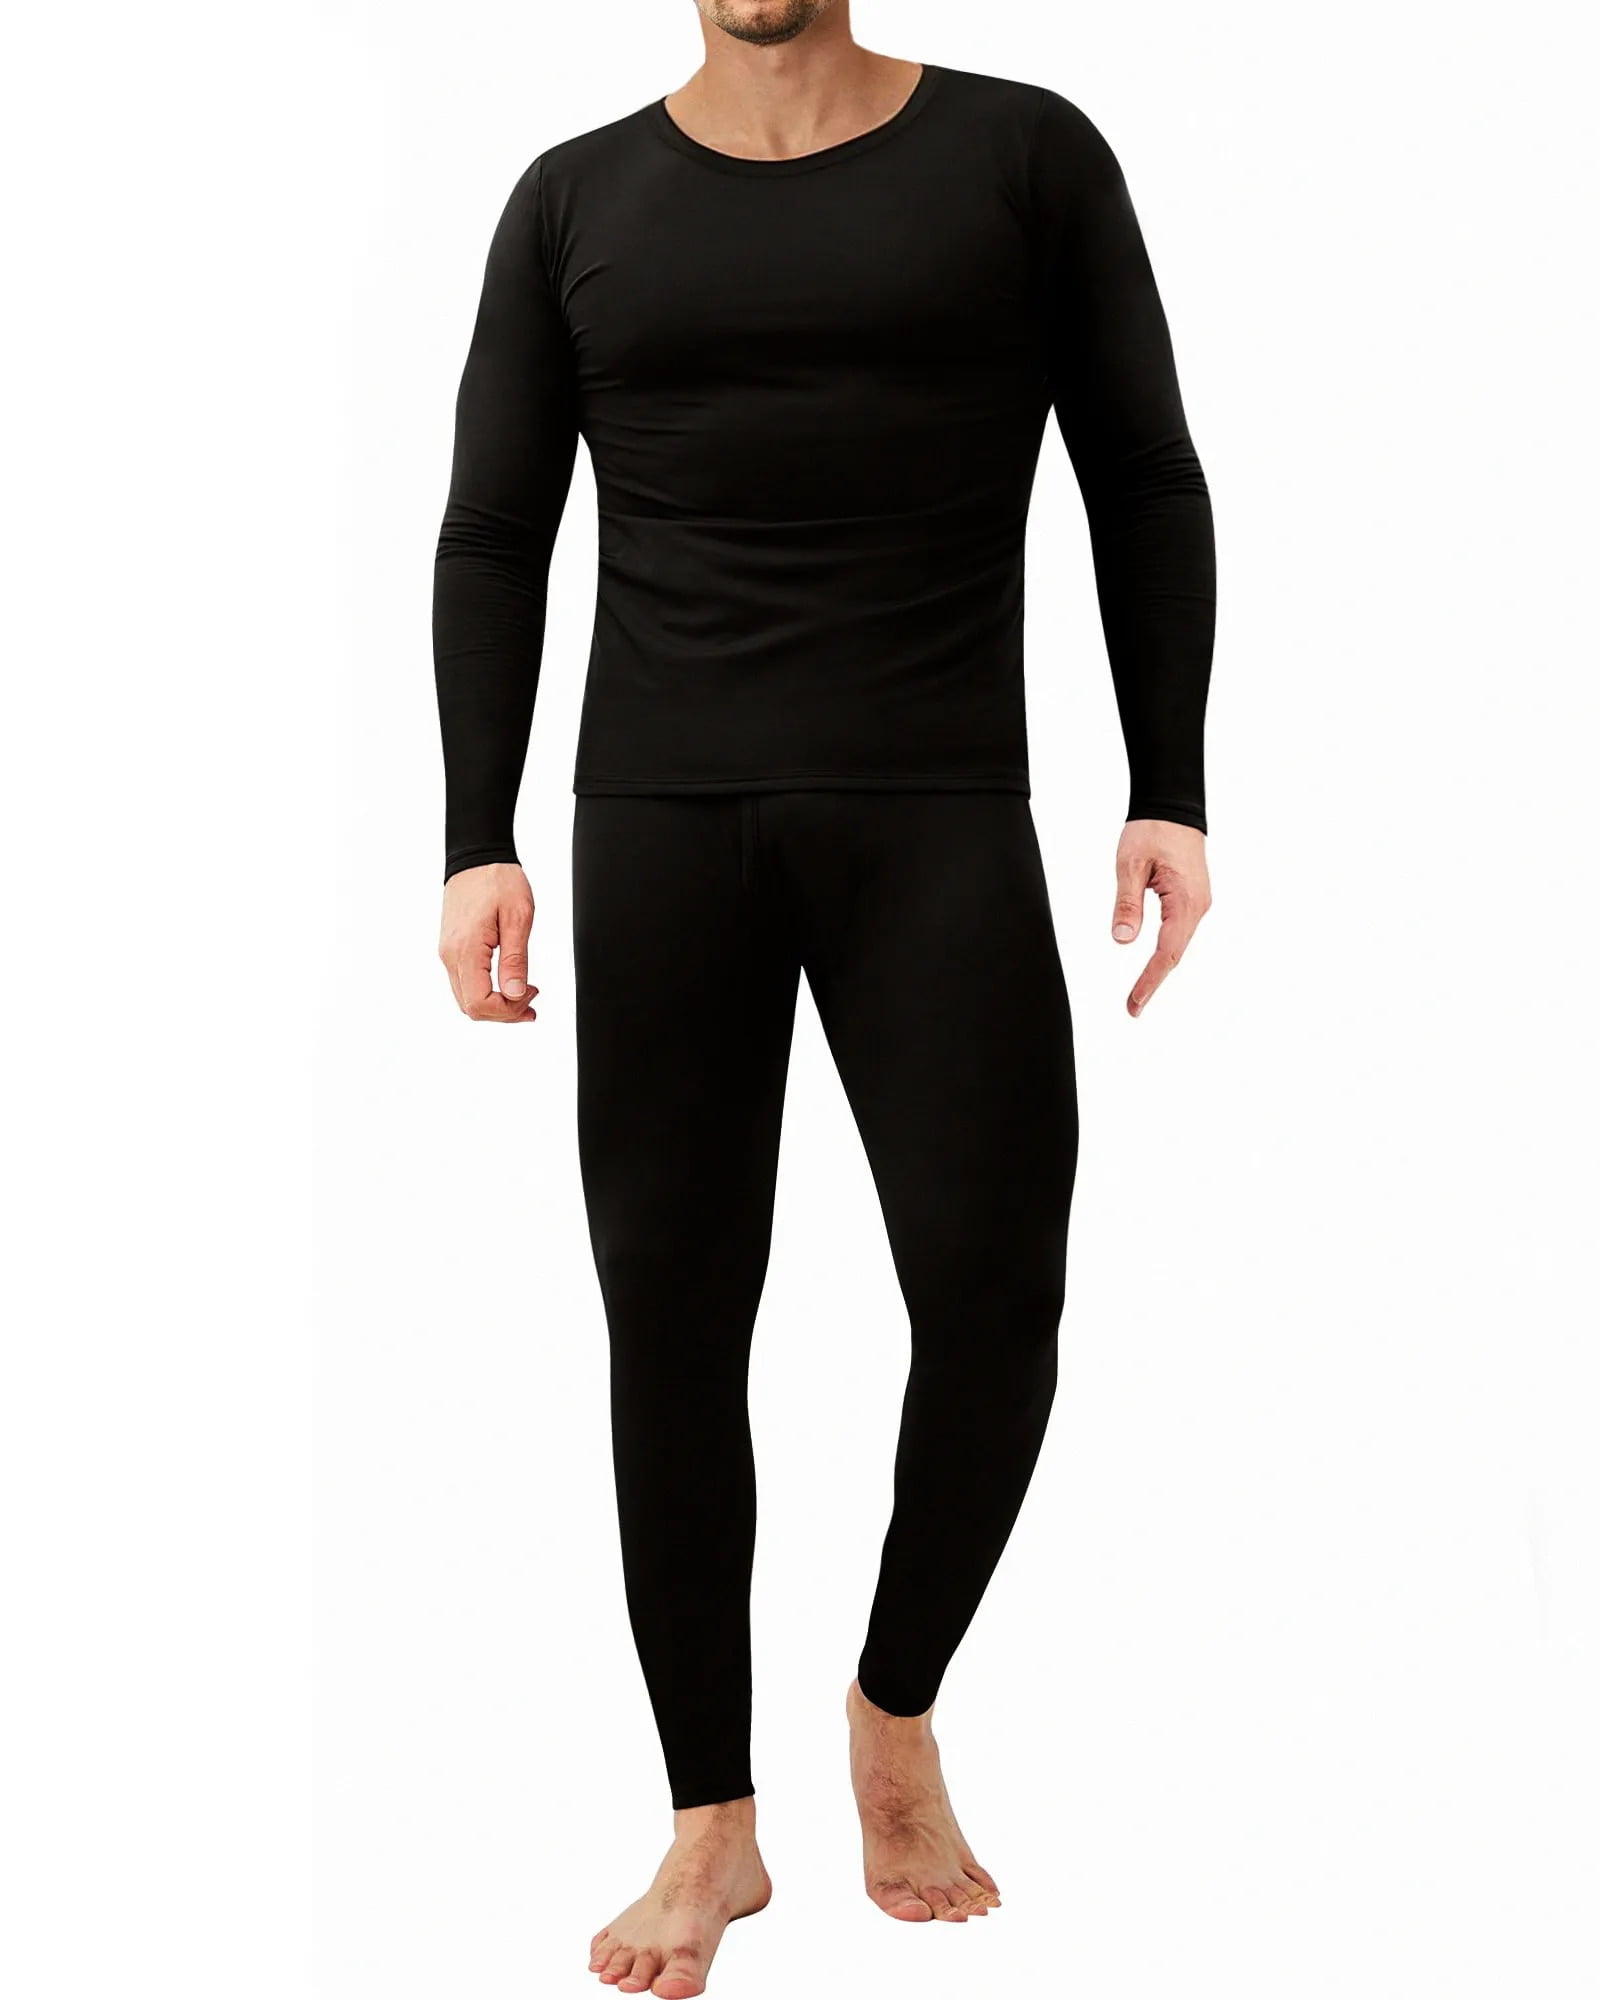 Men Thermal Underwear Sets Soft and Warm Underwear Base Layer for Cold ...